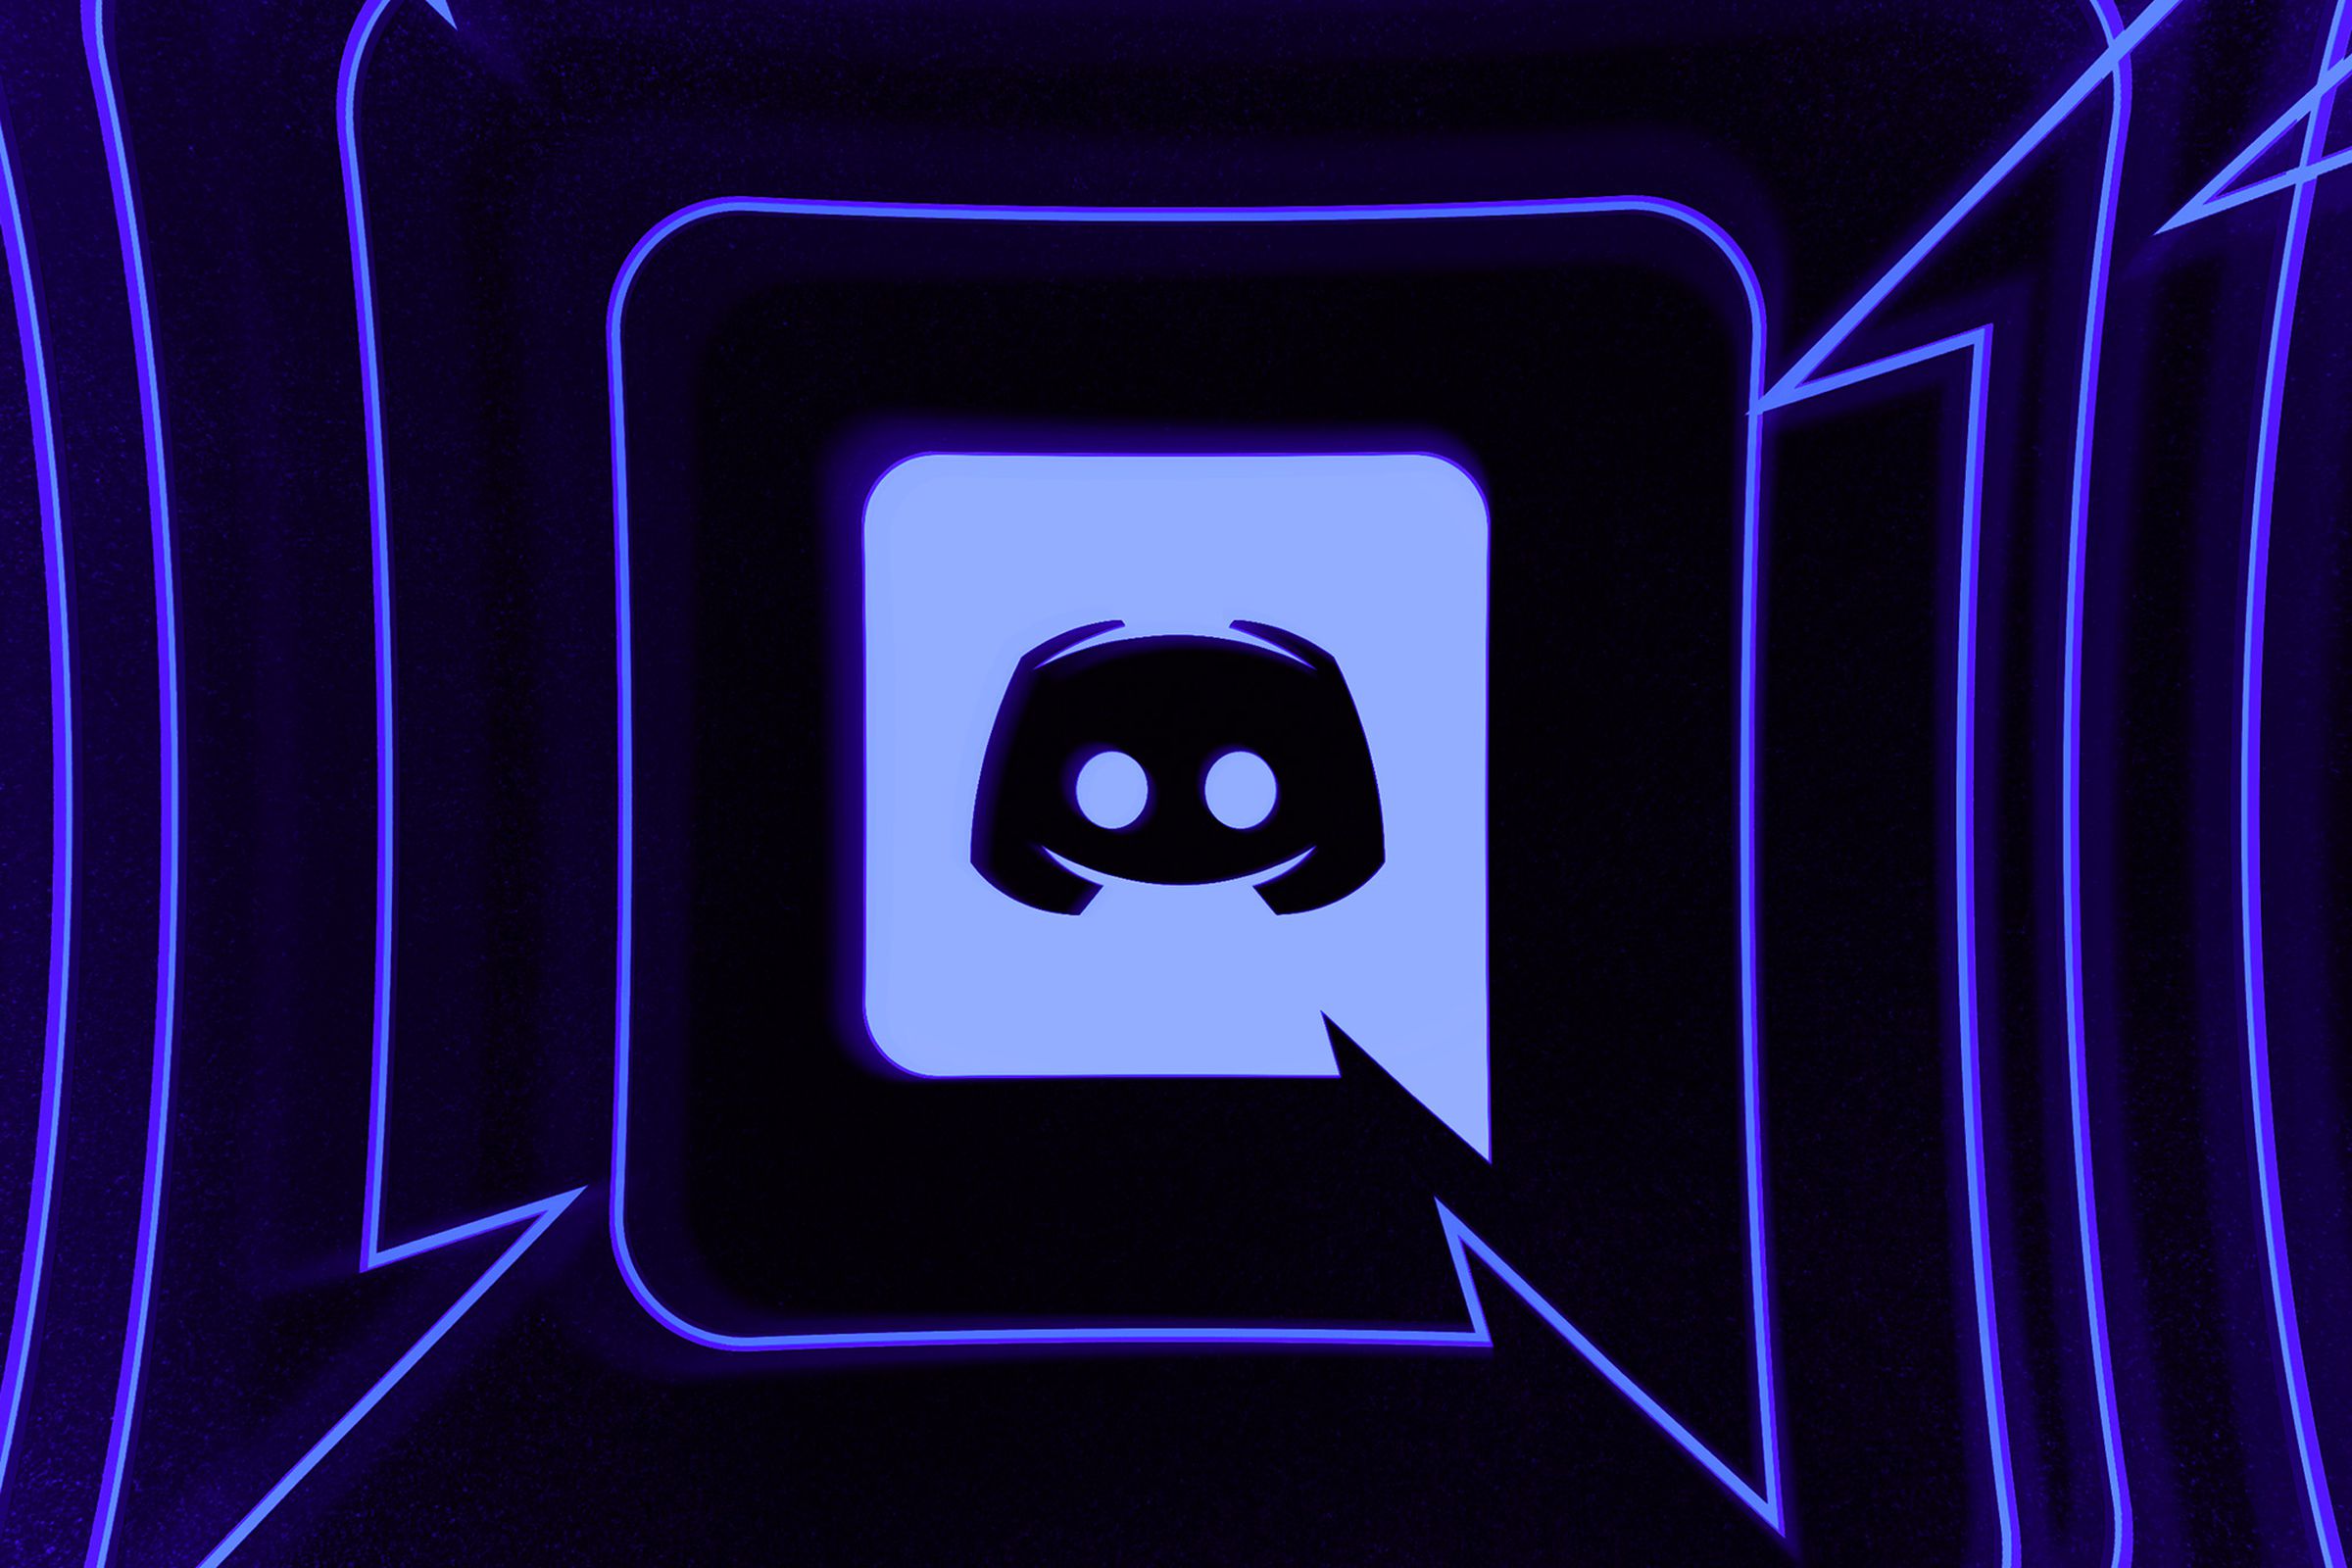 Discord will let you have unique avatars across different servers